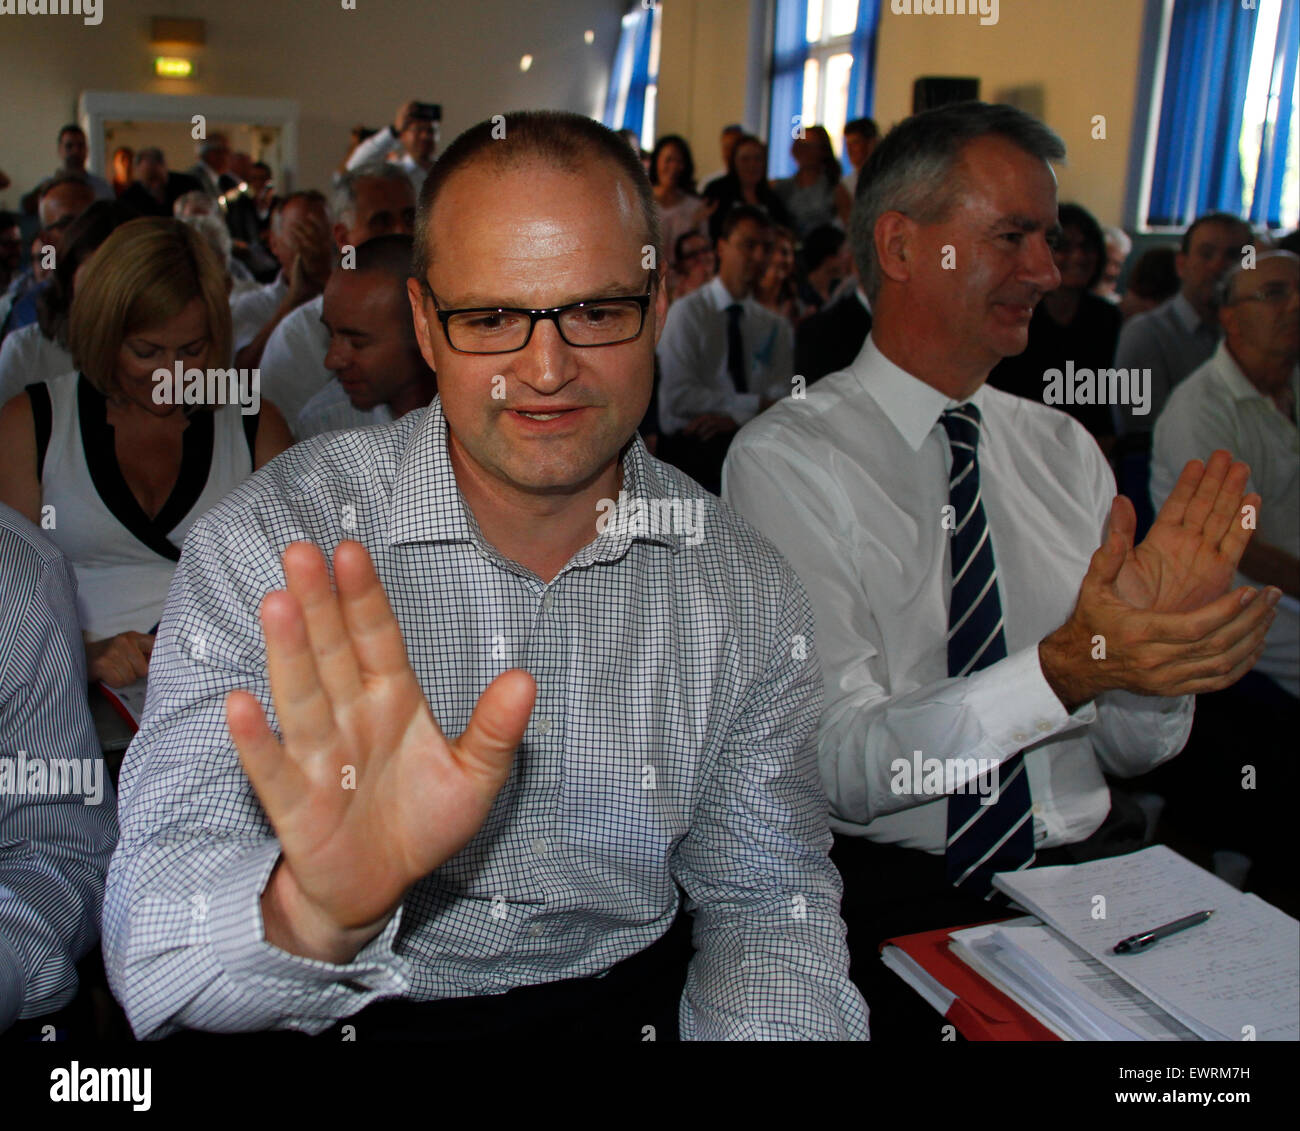 Whitby, UK. 30th June, 2015. Chris Fraser After Planning Committee Members Yes Vote North Yorkshire Moors Sirius Planning Meeting North Yorkshire Moors Sirius Planning Meeting Royal Liverpool Golf Club, Sneaton Castle, Whitby, England 30 June 2015 Credit:  Allstar Picture Library/Alamy Live News Stock Photo